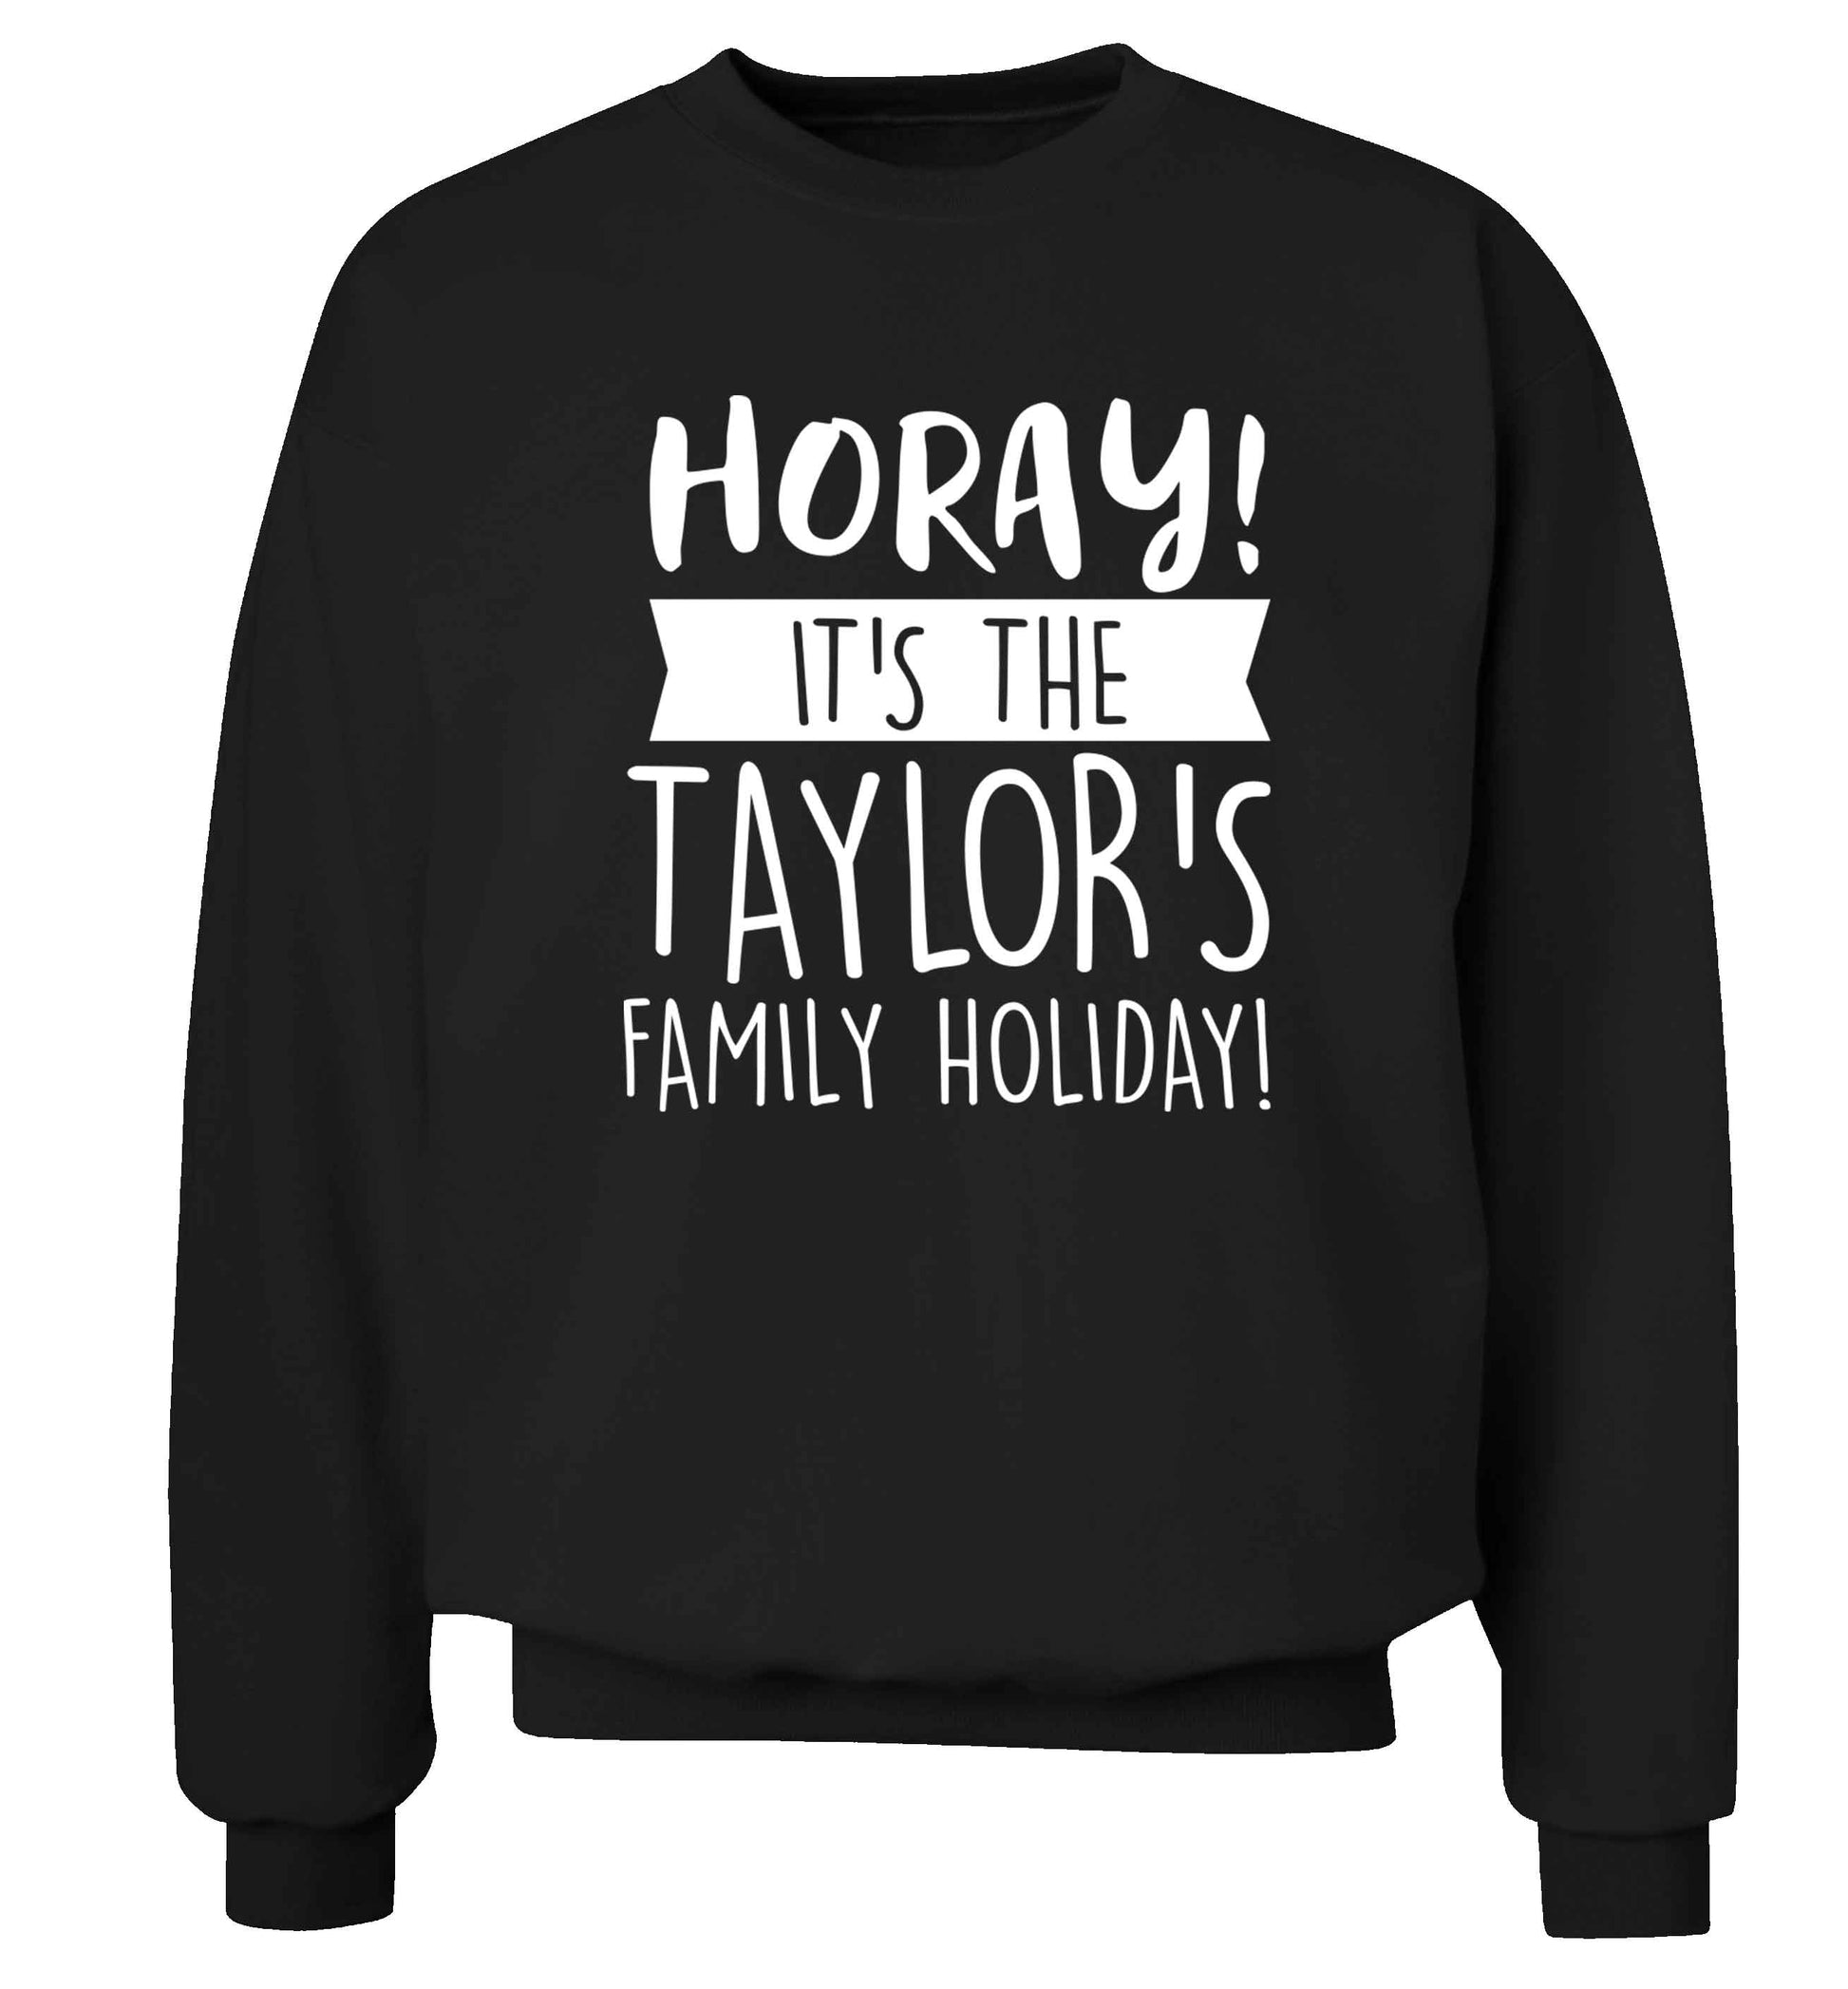 Horay it's the Taylor's family holiday! personalised item Adult's unisex black Sweater 2XL